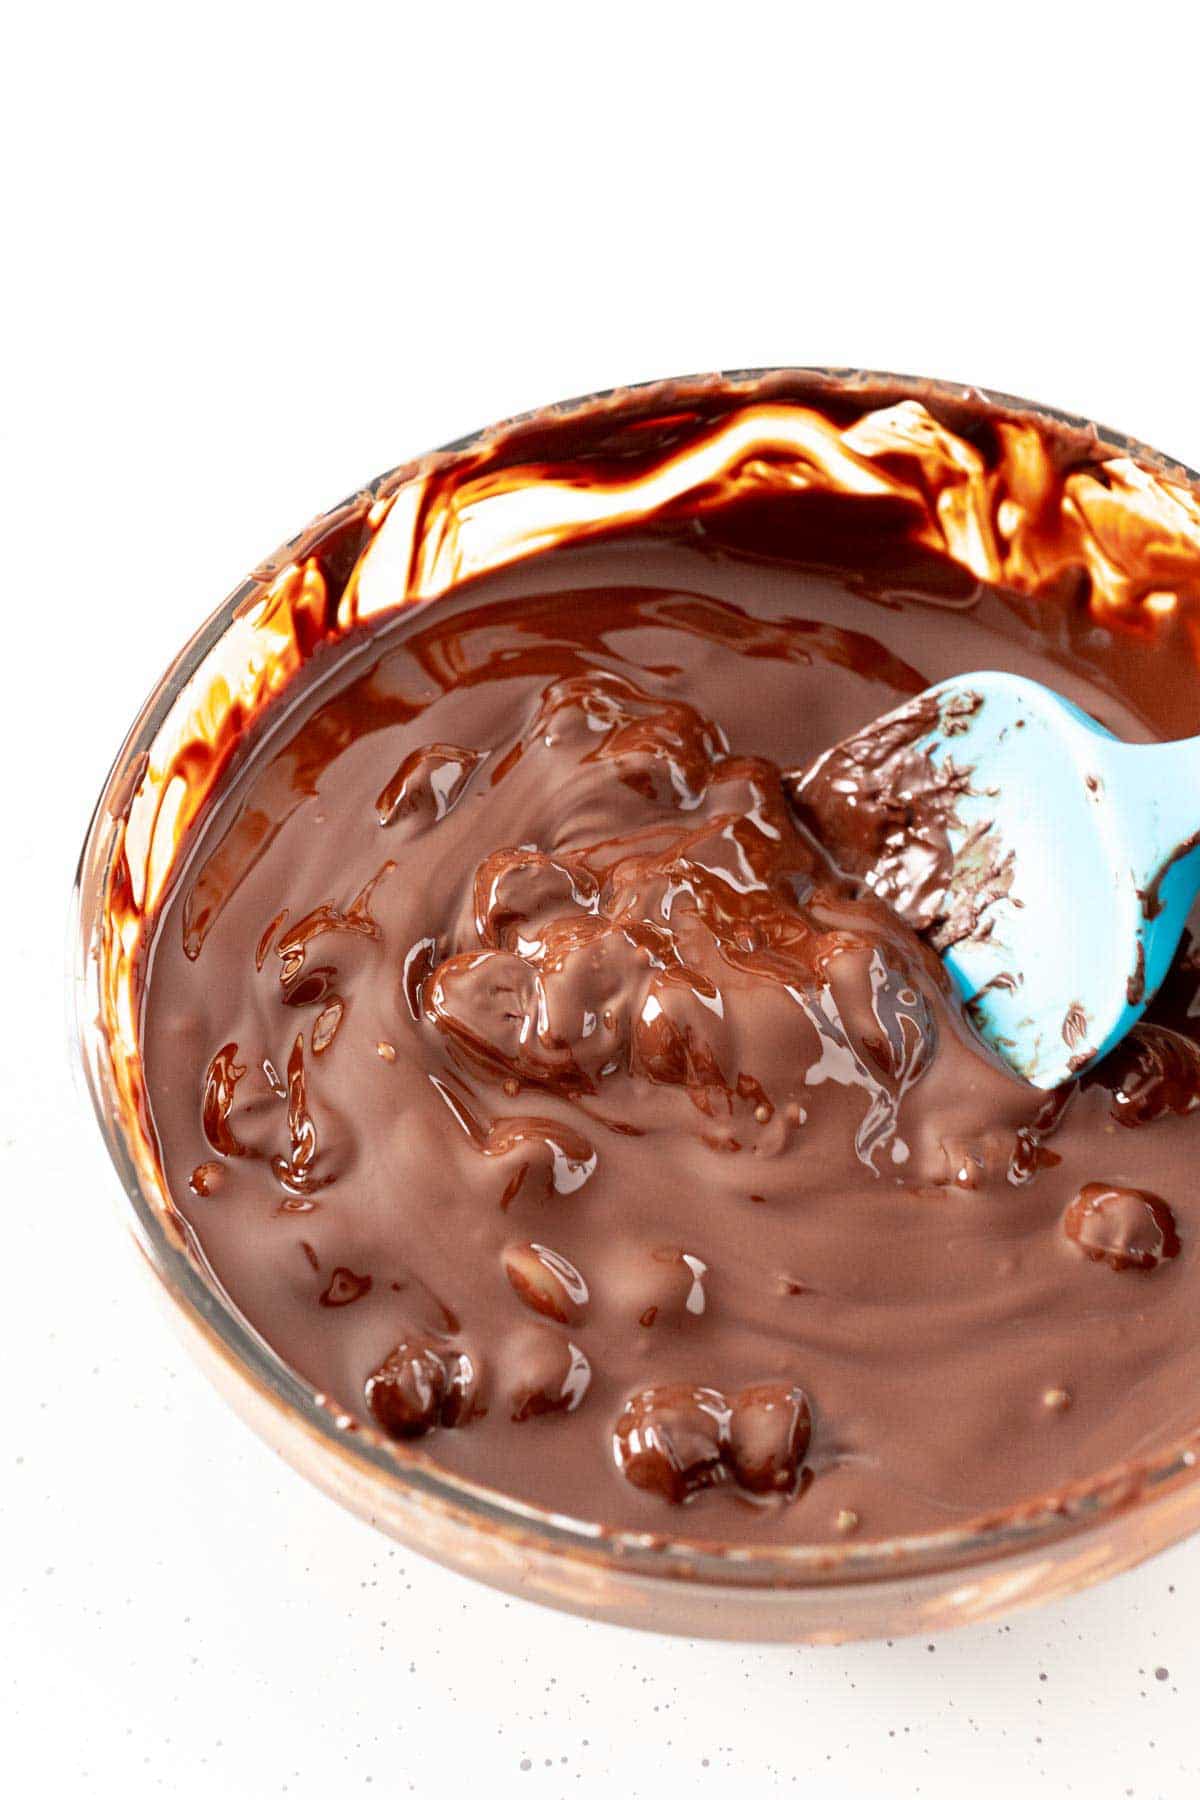 Rubber spatula stirring a bowl of melted chocolate